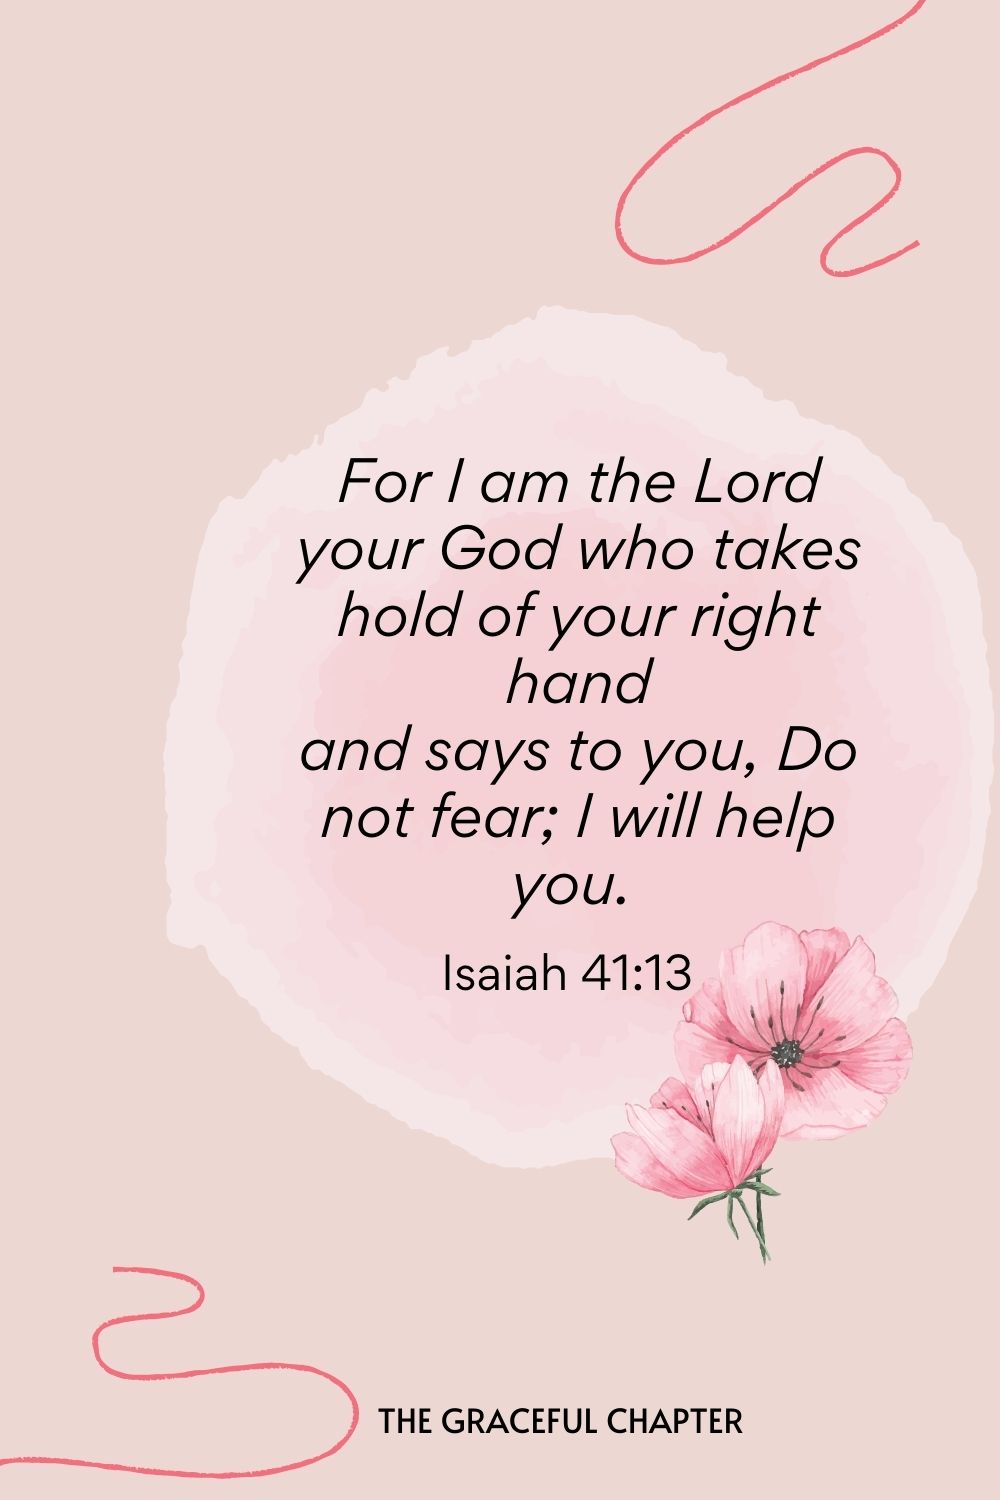 For I am the Lord your God who takes hold of your right hand and says to you, Do not fear; I will help you.  Isaiah 41:13